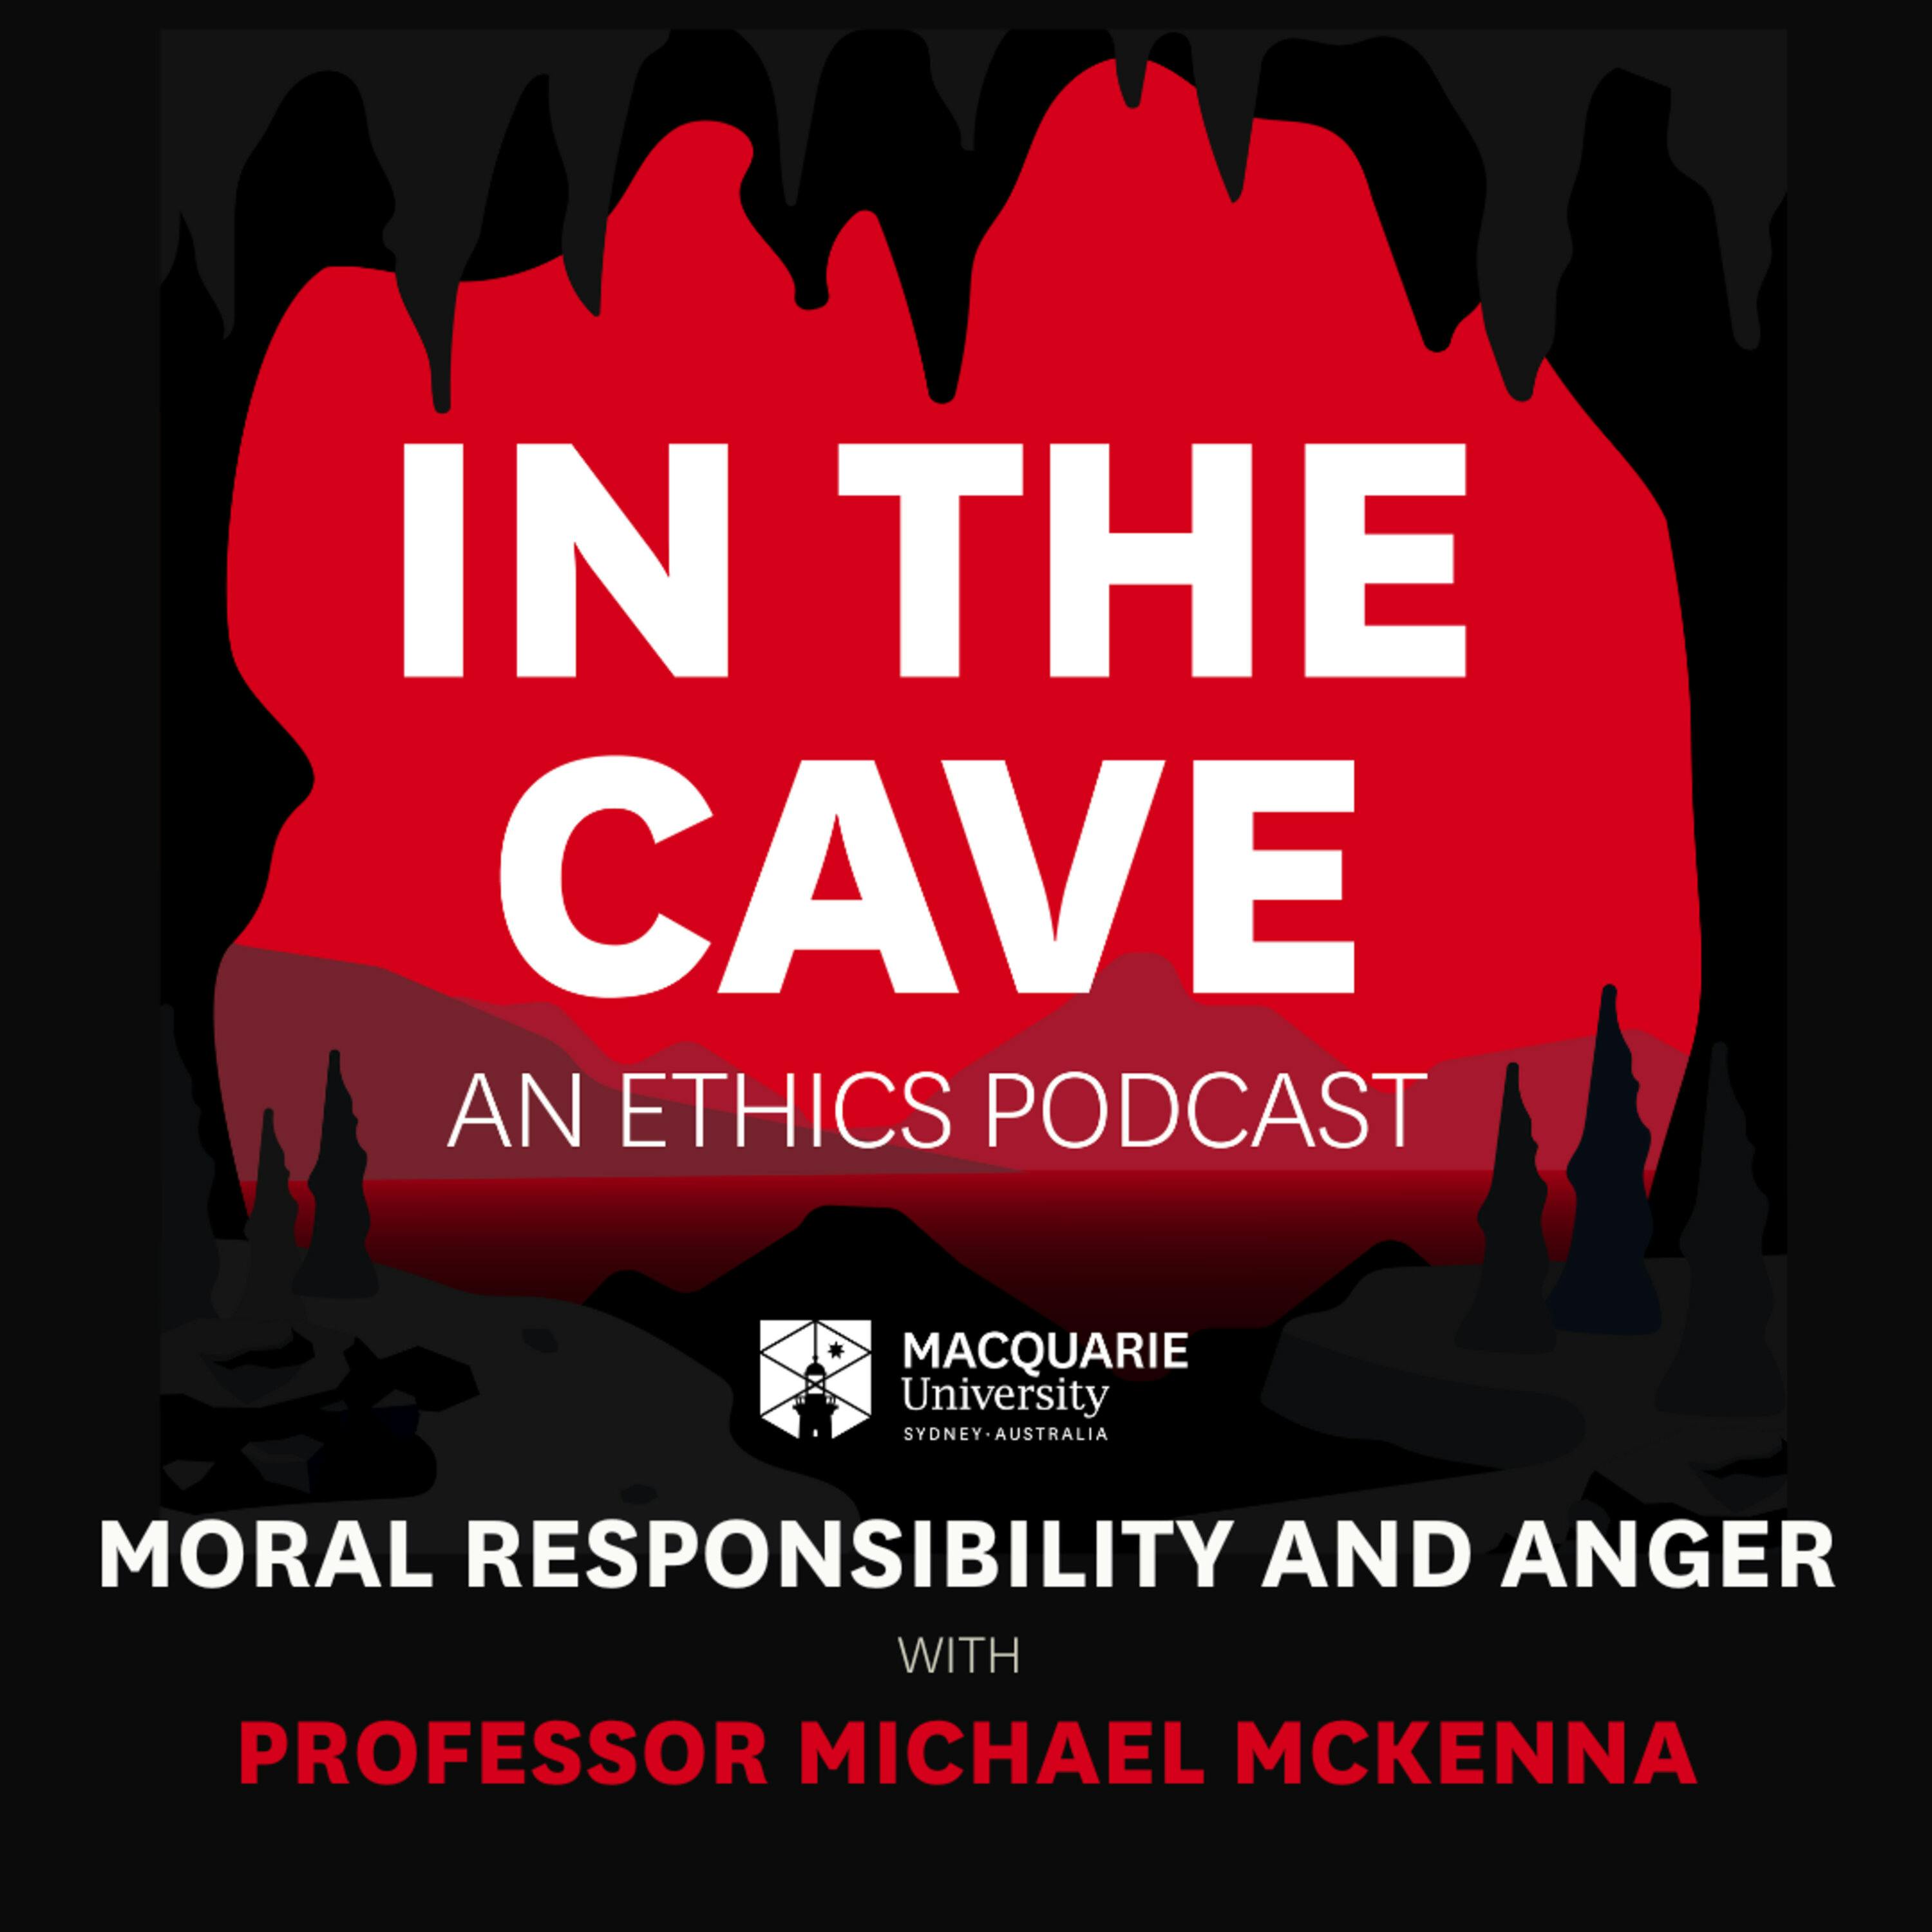 Moral Responsibility and Anger with Professor Michael McKenna